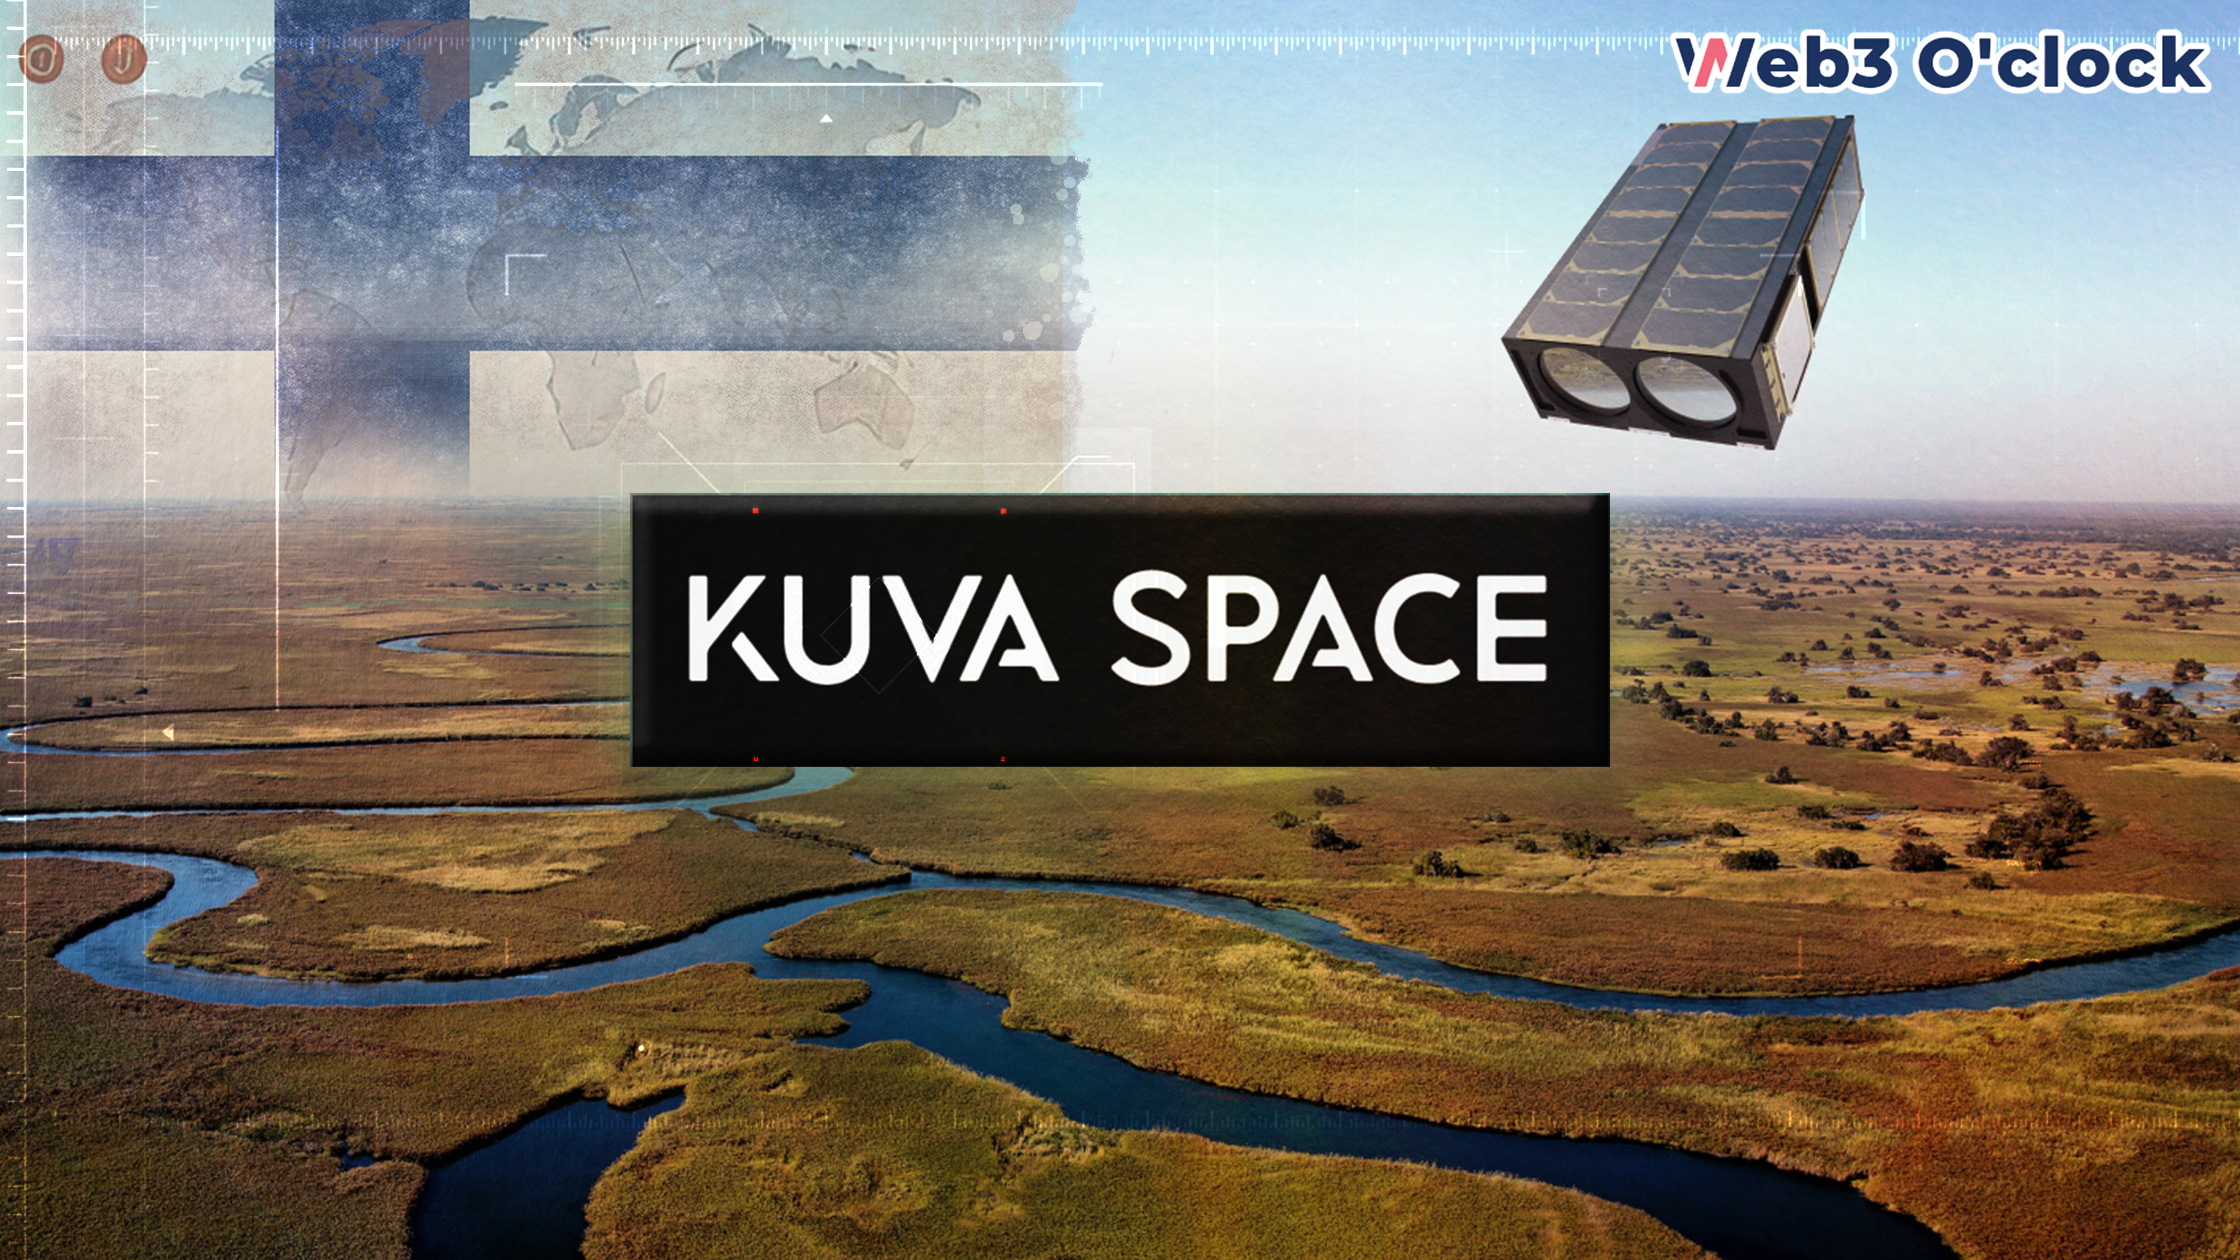 Kuva Space Secures €16.6M in Funding by Web3O'clock